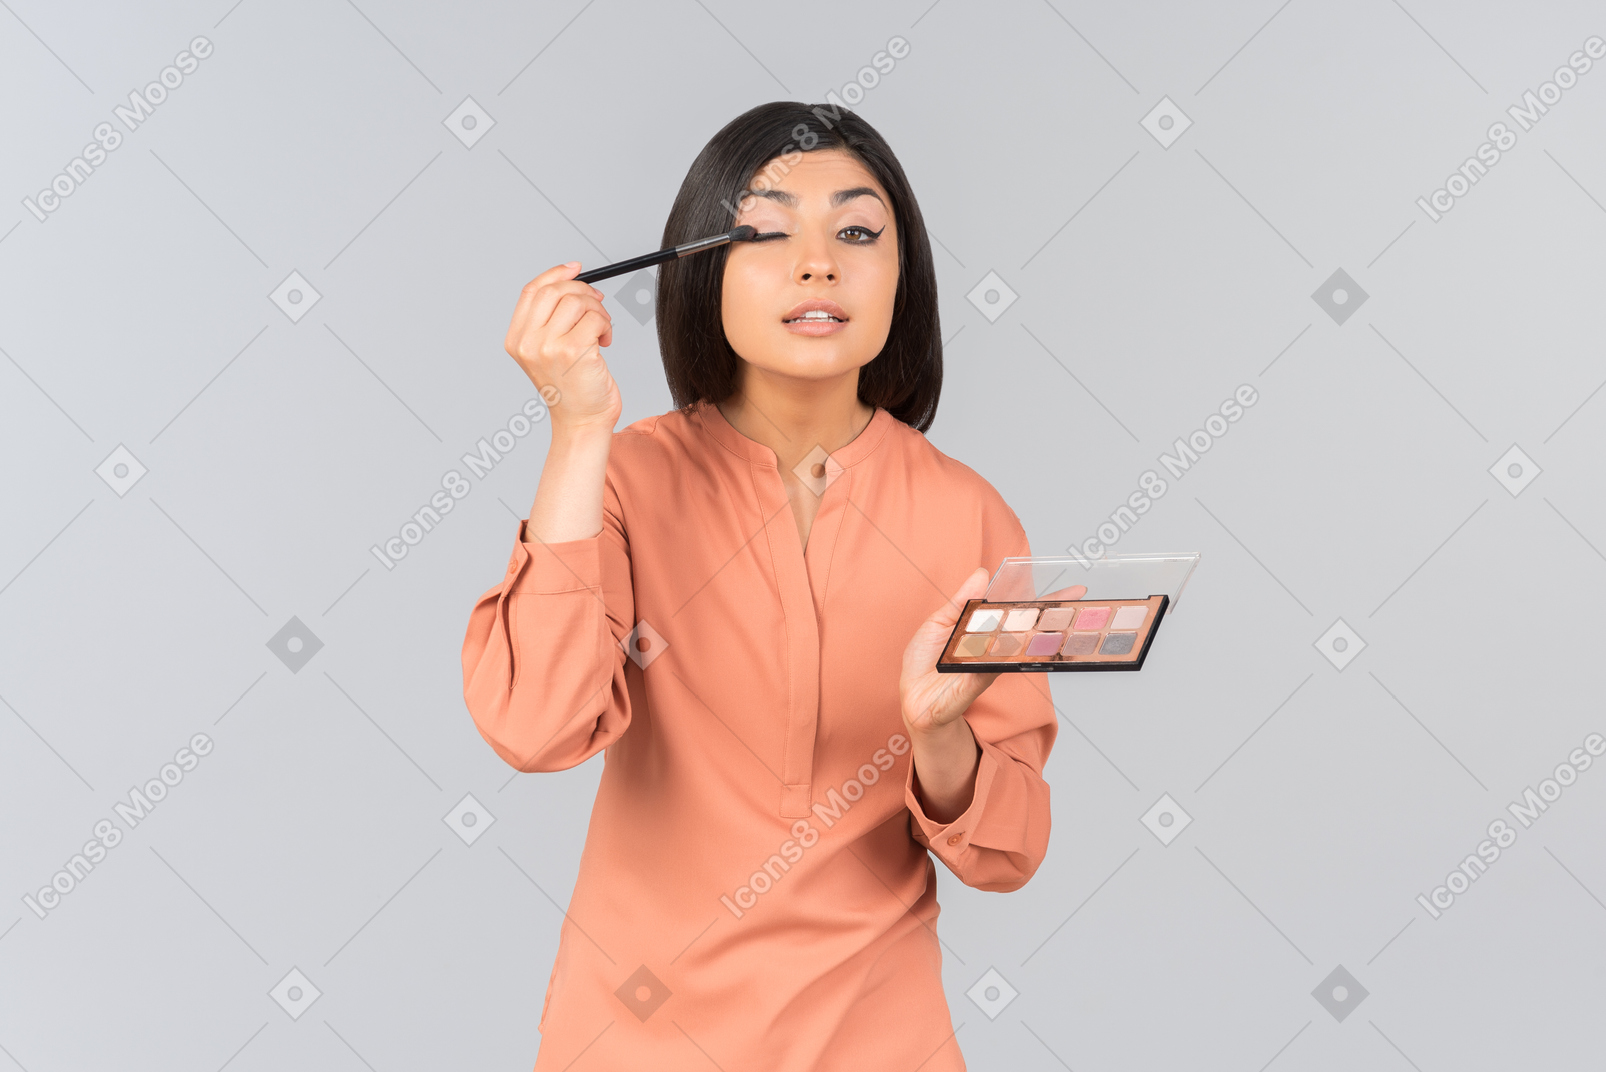 Indian woman pointing at lip balms she's holding